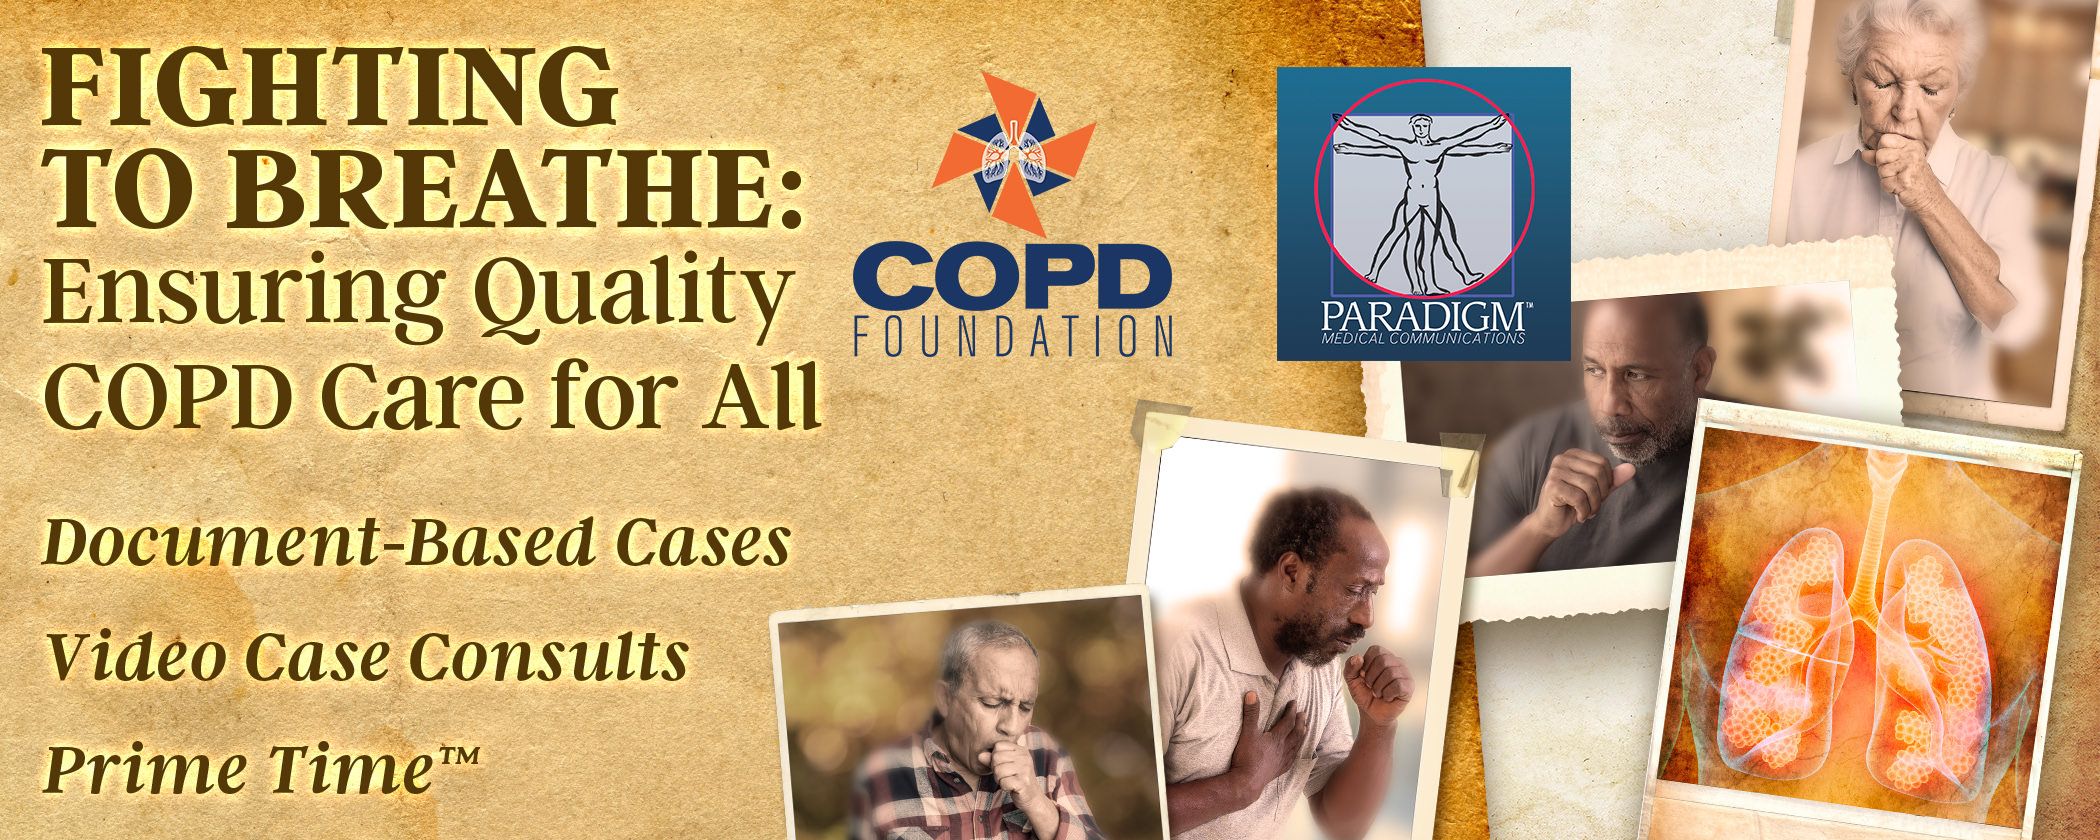 Fighting to breathe: Ensuring Quality COPD Care for all